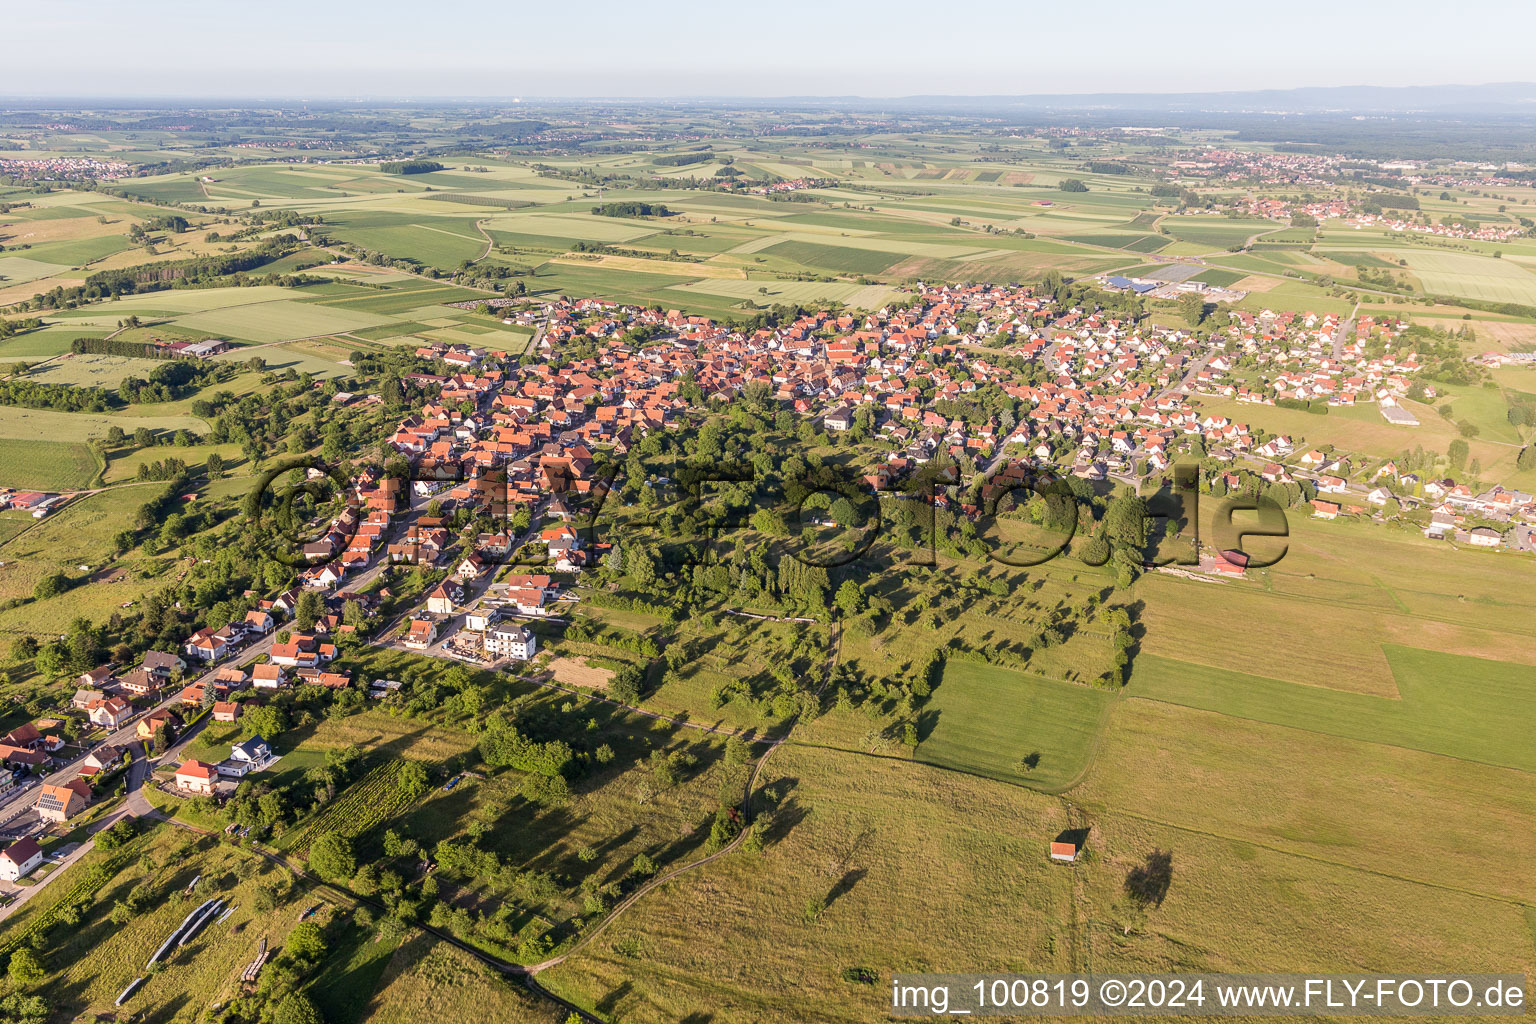 Village - view on the edge of agricultural fields and farmland in Surbourg in Grand Est, France